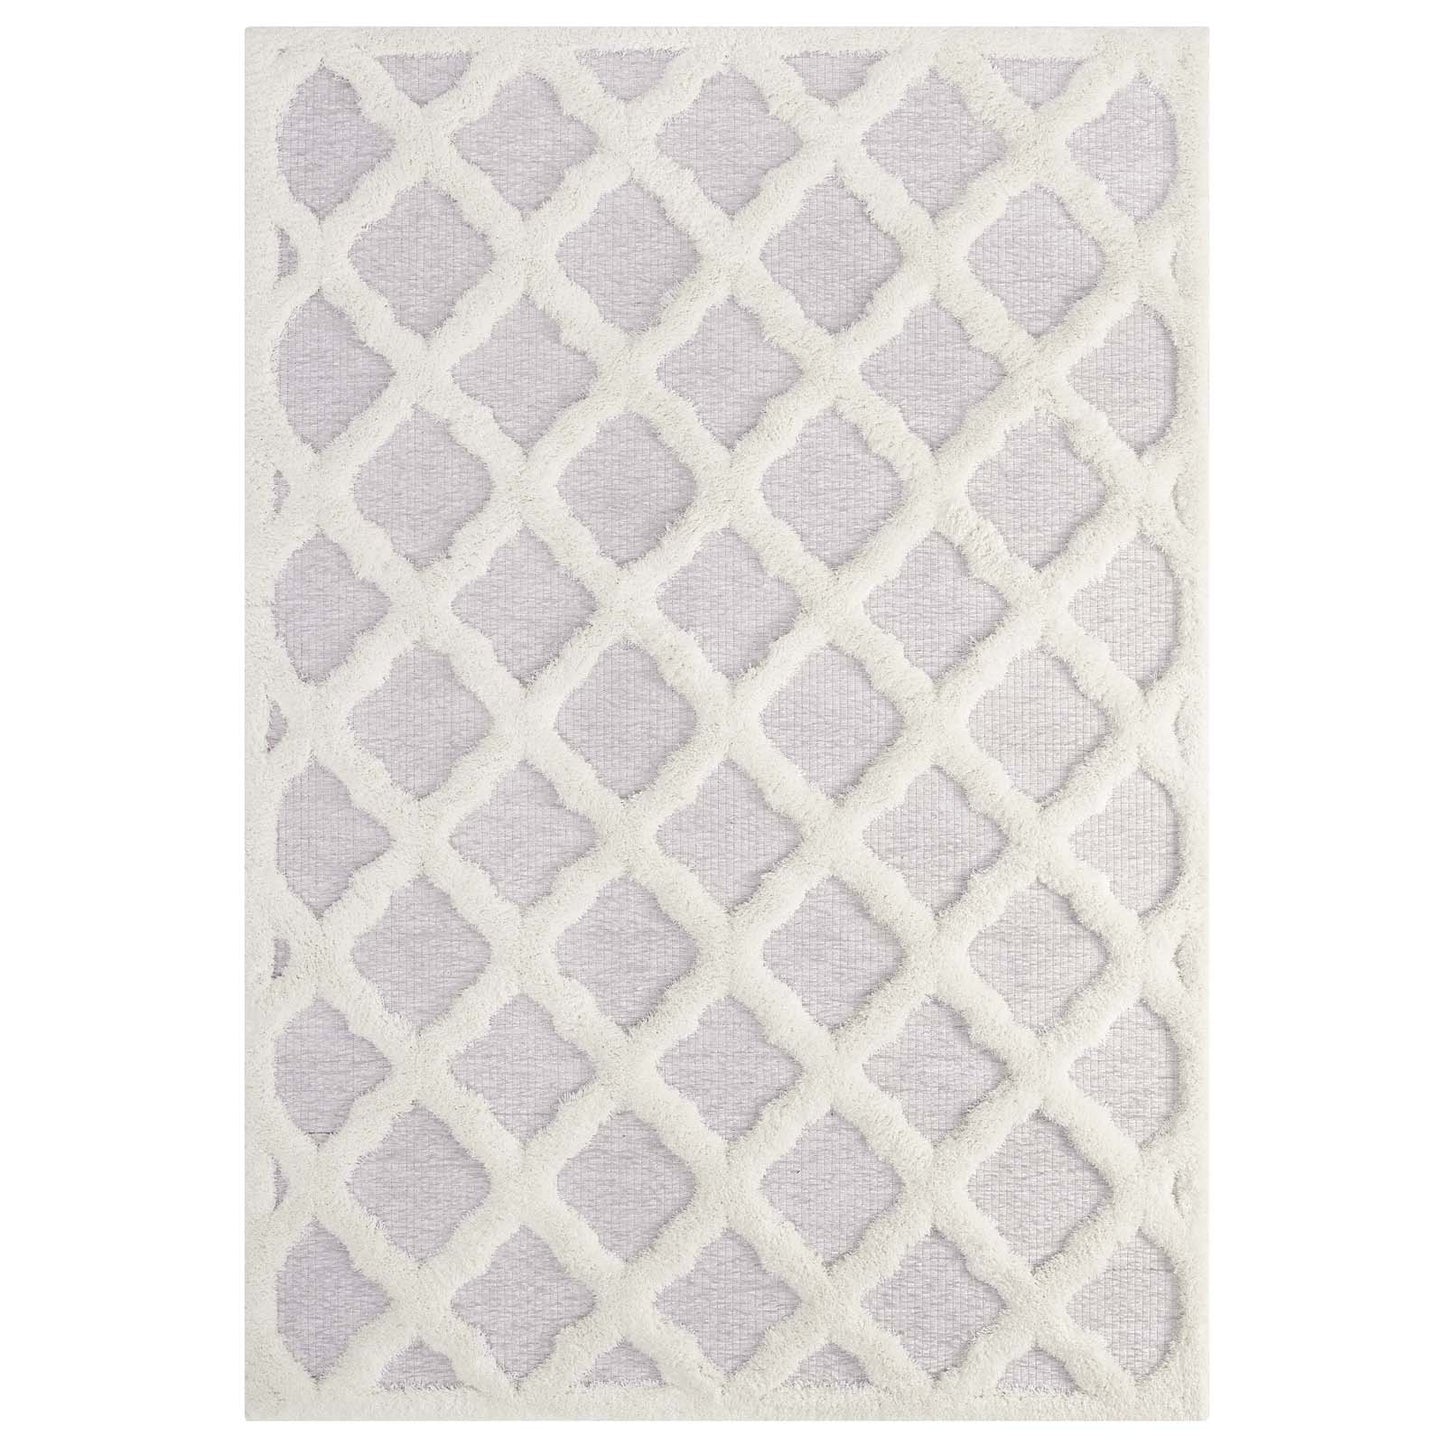 Whimsical Regale Abstract Moroccan Trellis 5x8 Shag Area Rug Ivory and Light Gray R-1154A-58